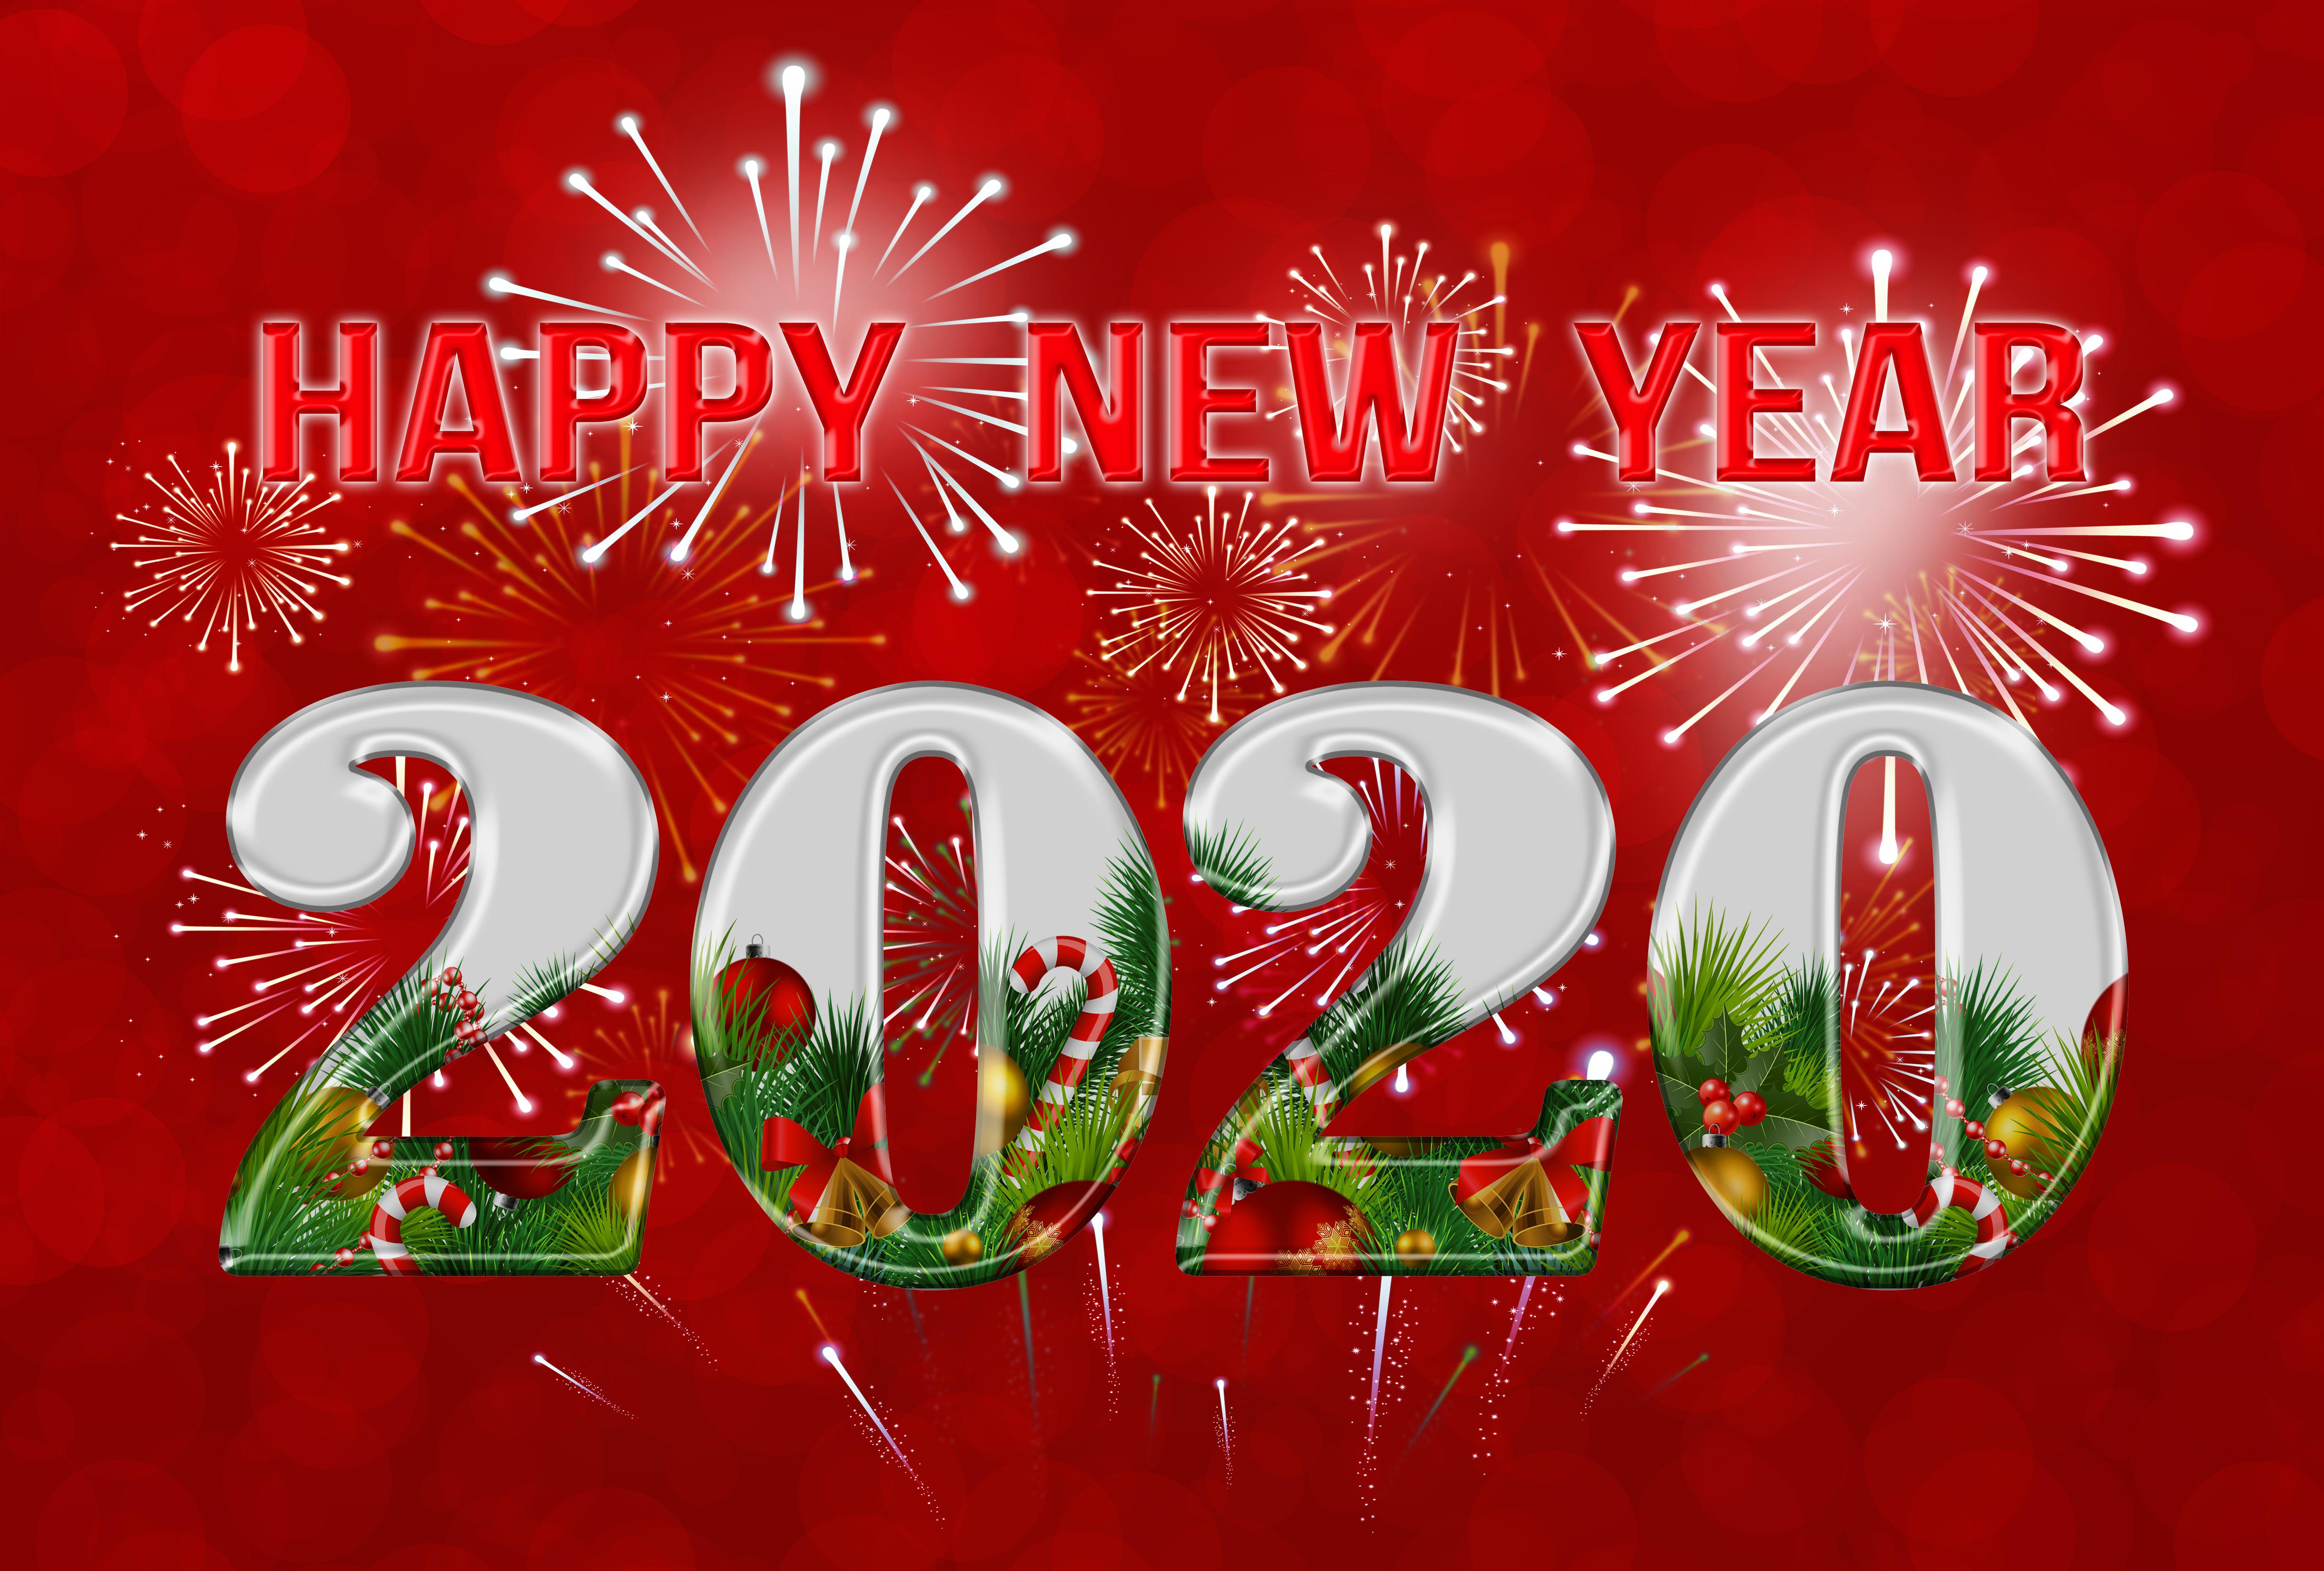 New Year 2020 4k Ultra HD Wallpaper. Background Image